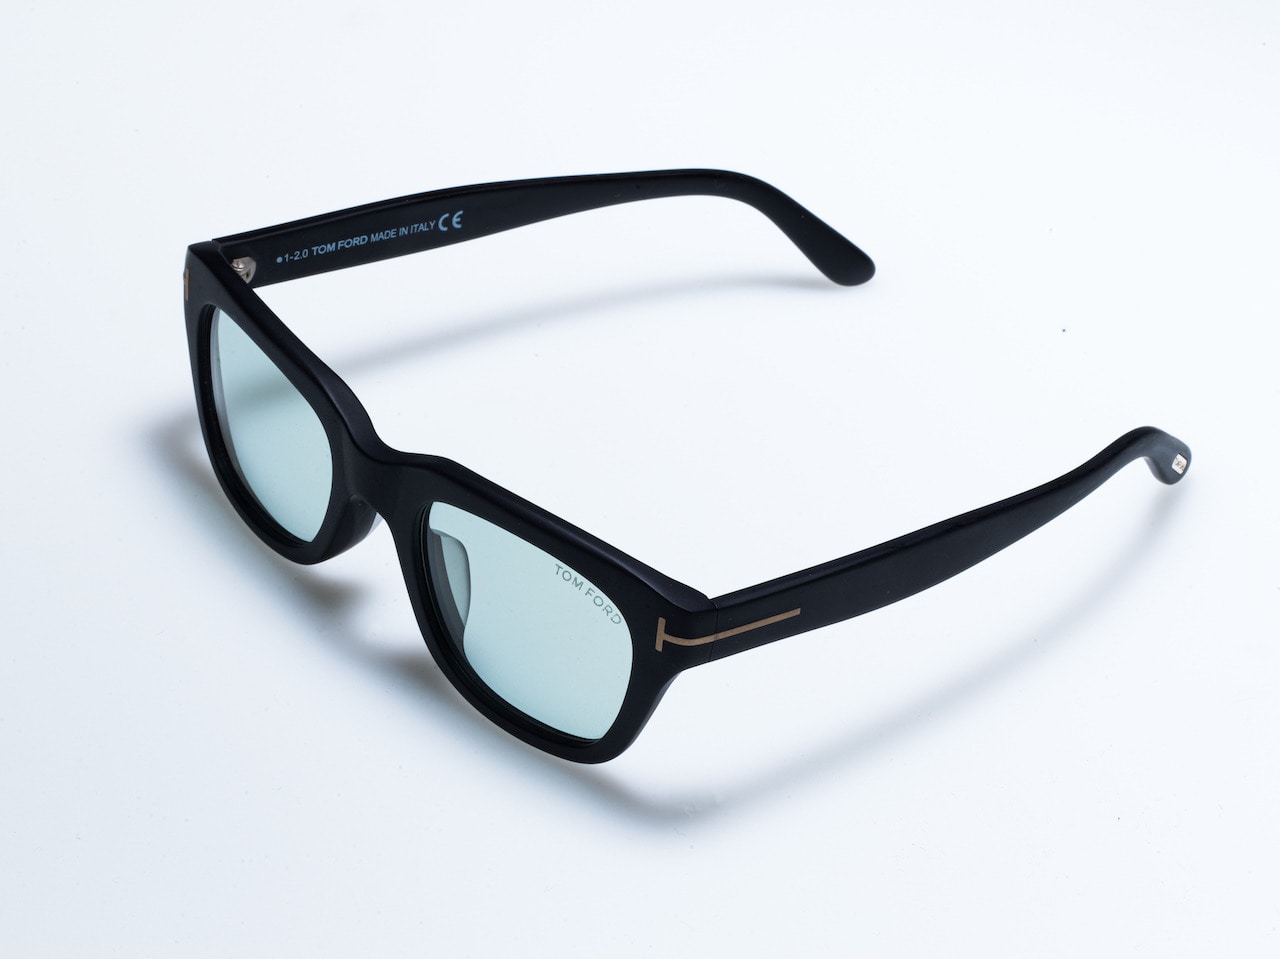 TOM FORD EYEWEAR Exclusive for Ron Herman New Arrival